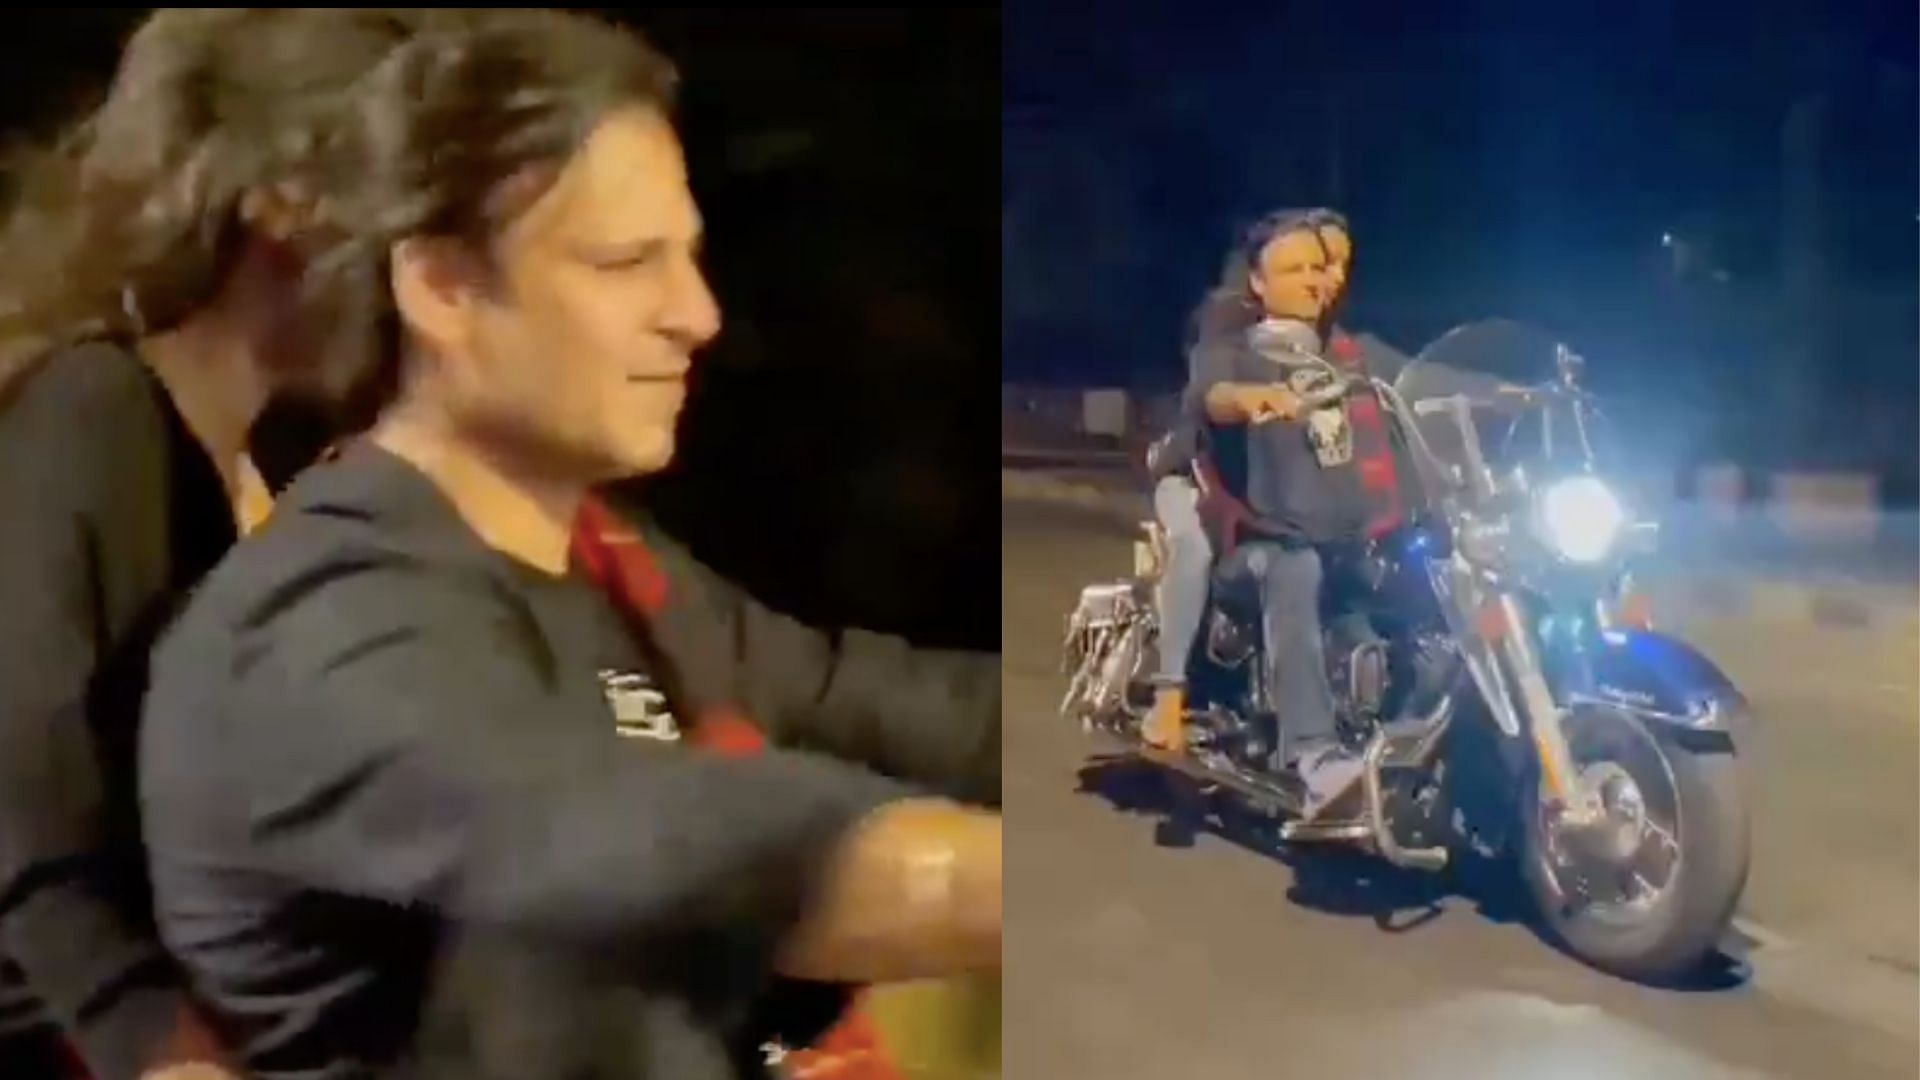 Vivek Oberoi was riding a motorbike without a helmet and a mask.